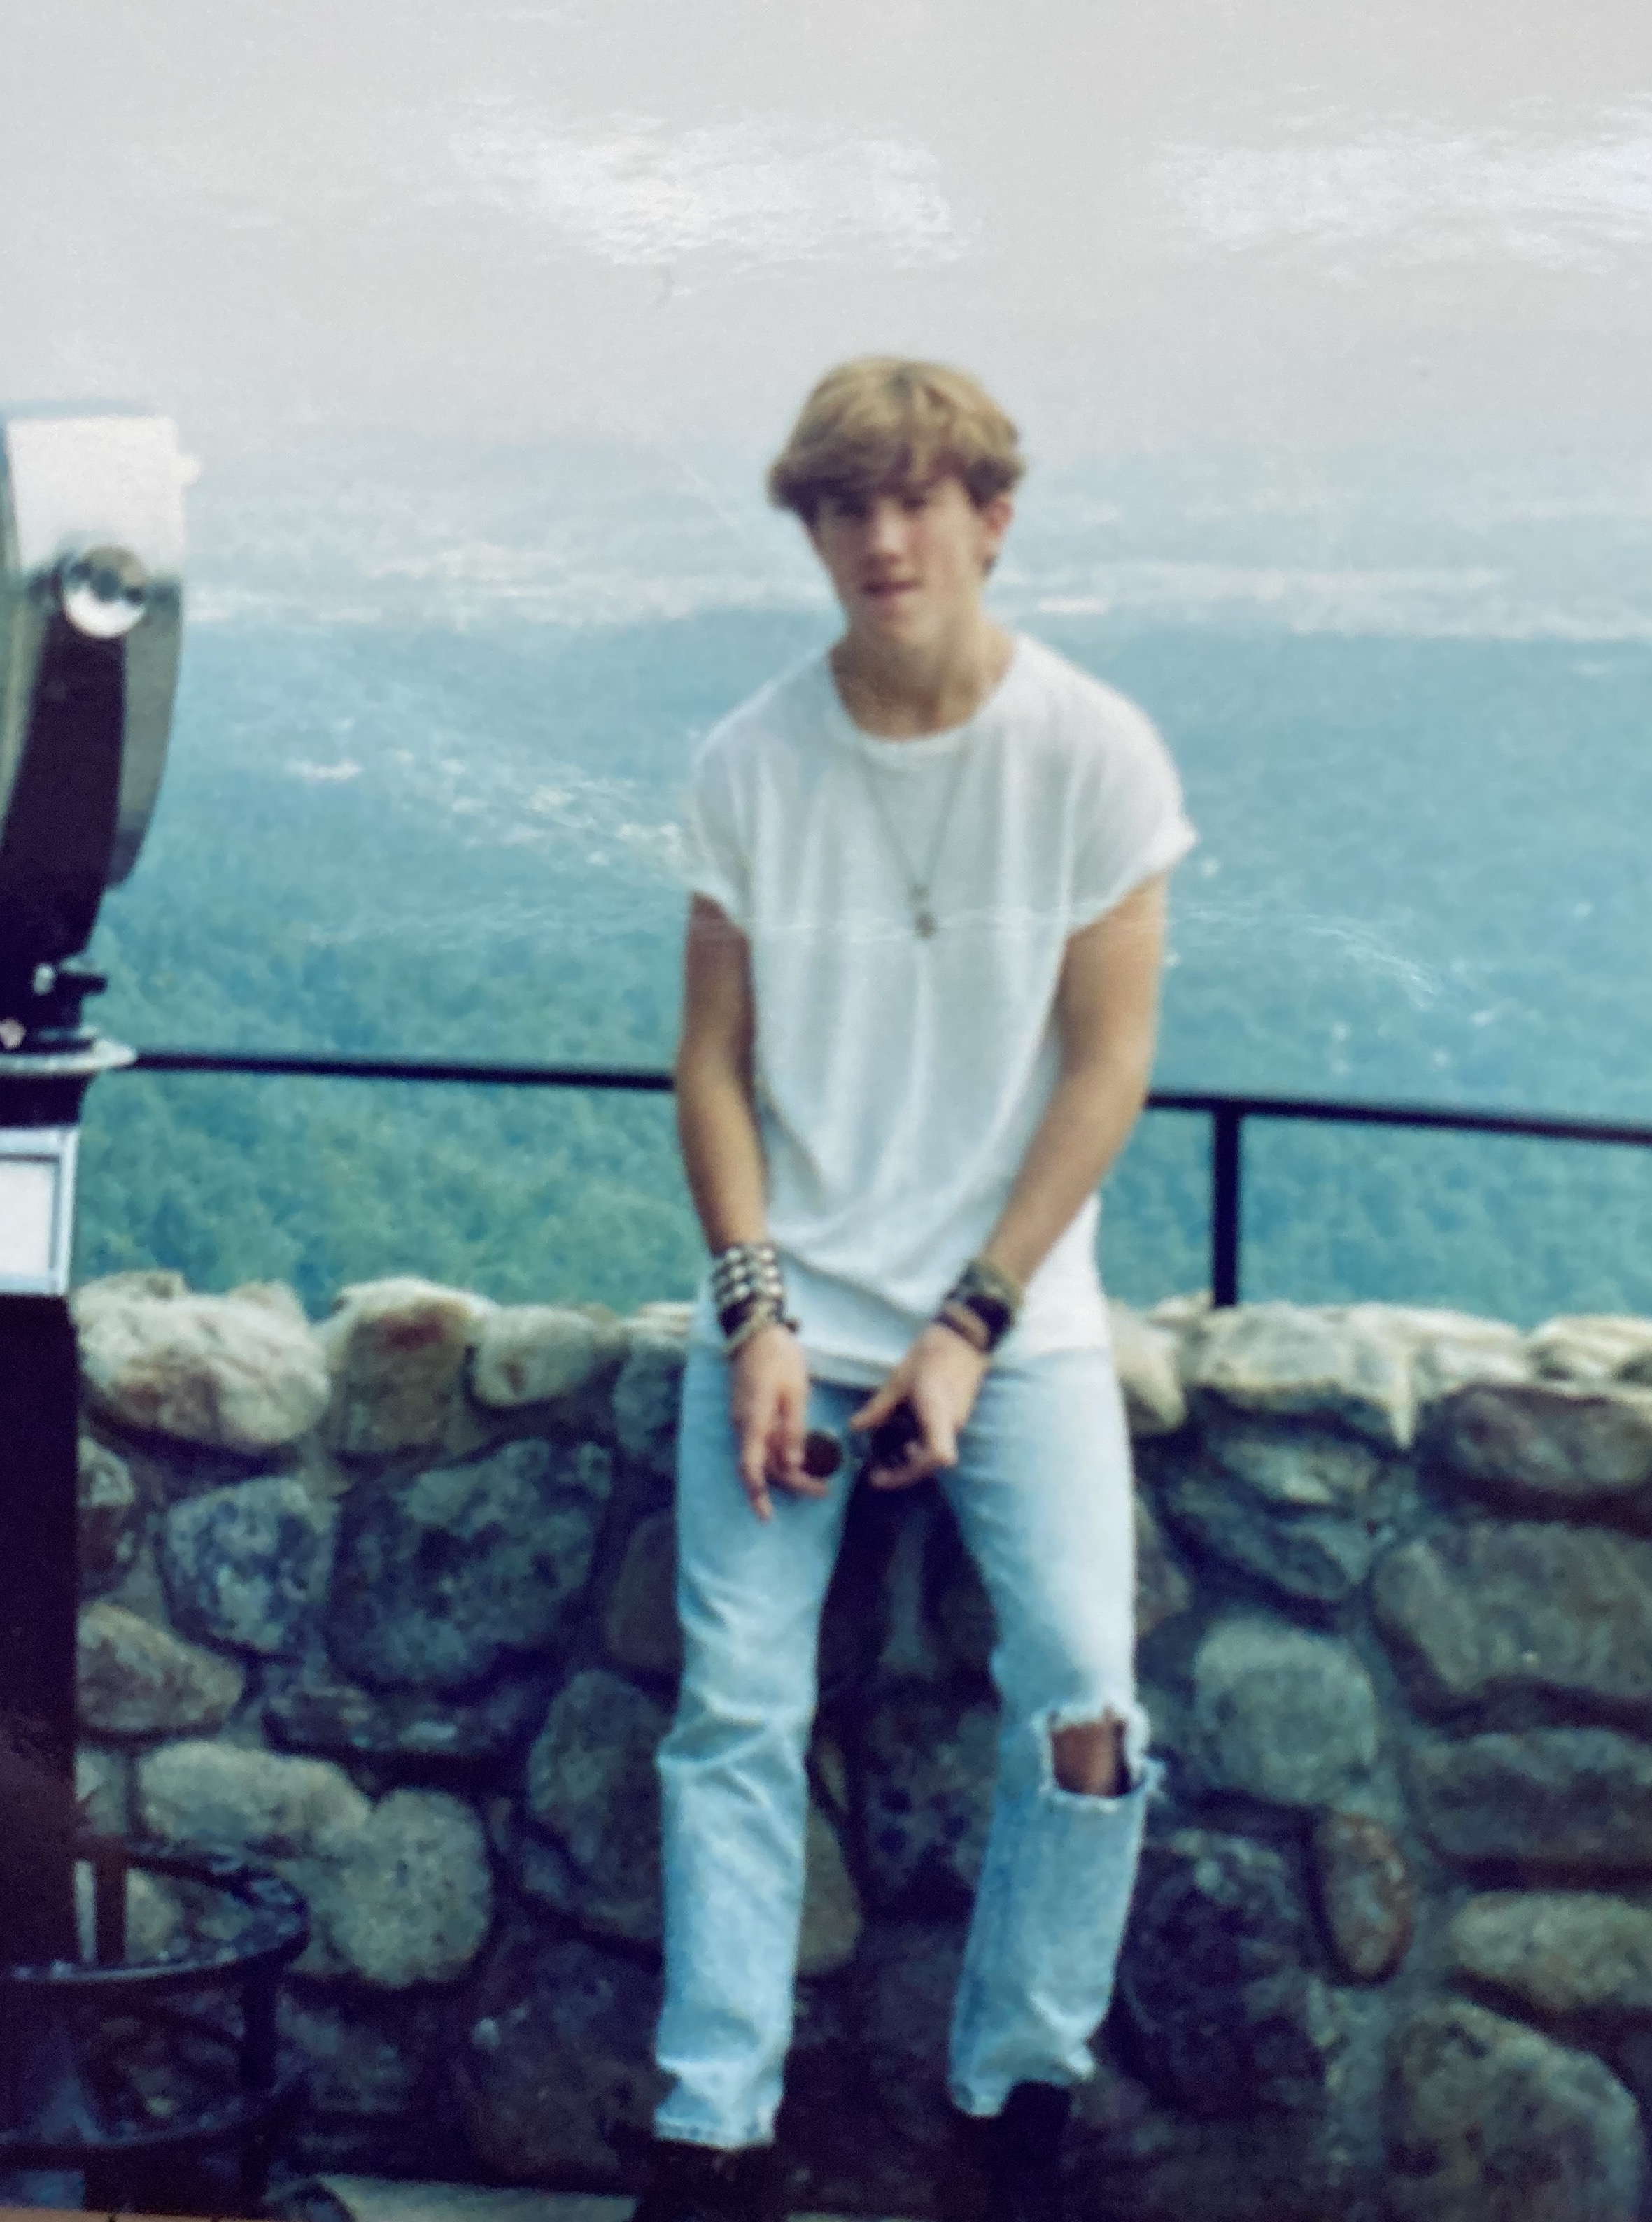 fd Lookout Mountain, 1988